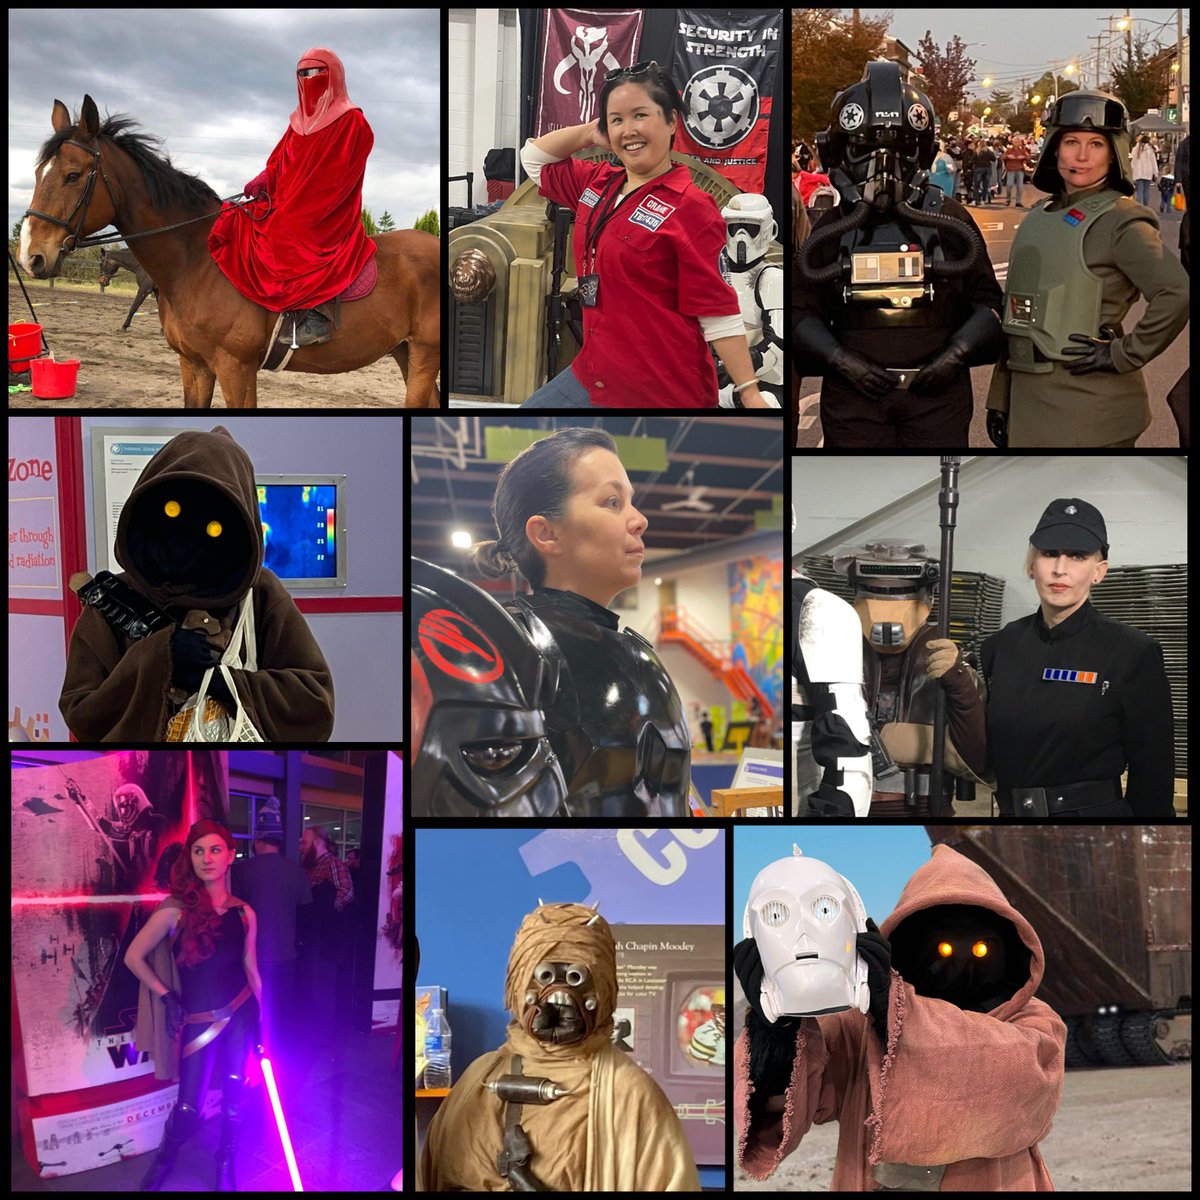 Palpatine may be Emperor, but the strength of the Empire rests on the shoulders of our female troopers. Happy Intergalactic Women’s day from Garrison Carida! #intergalaticwomensday #BadGirlsDoingGood #501st #501stLegion #official501st #GarrisonCaridaTroopers